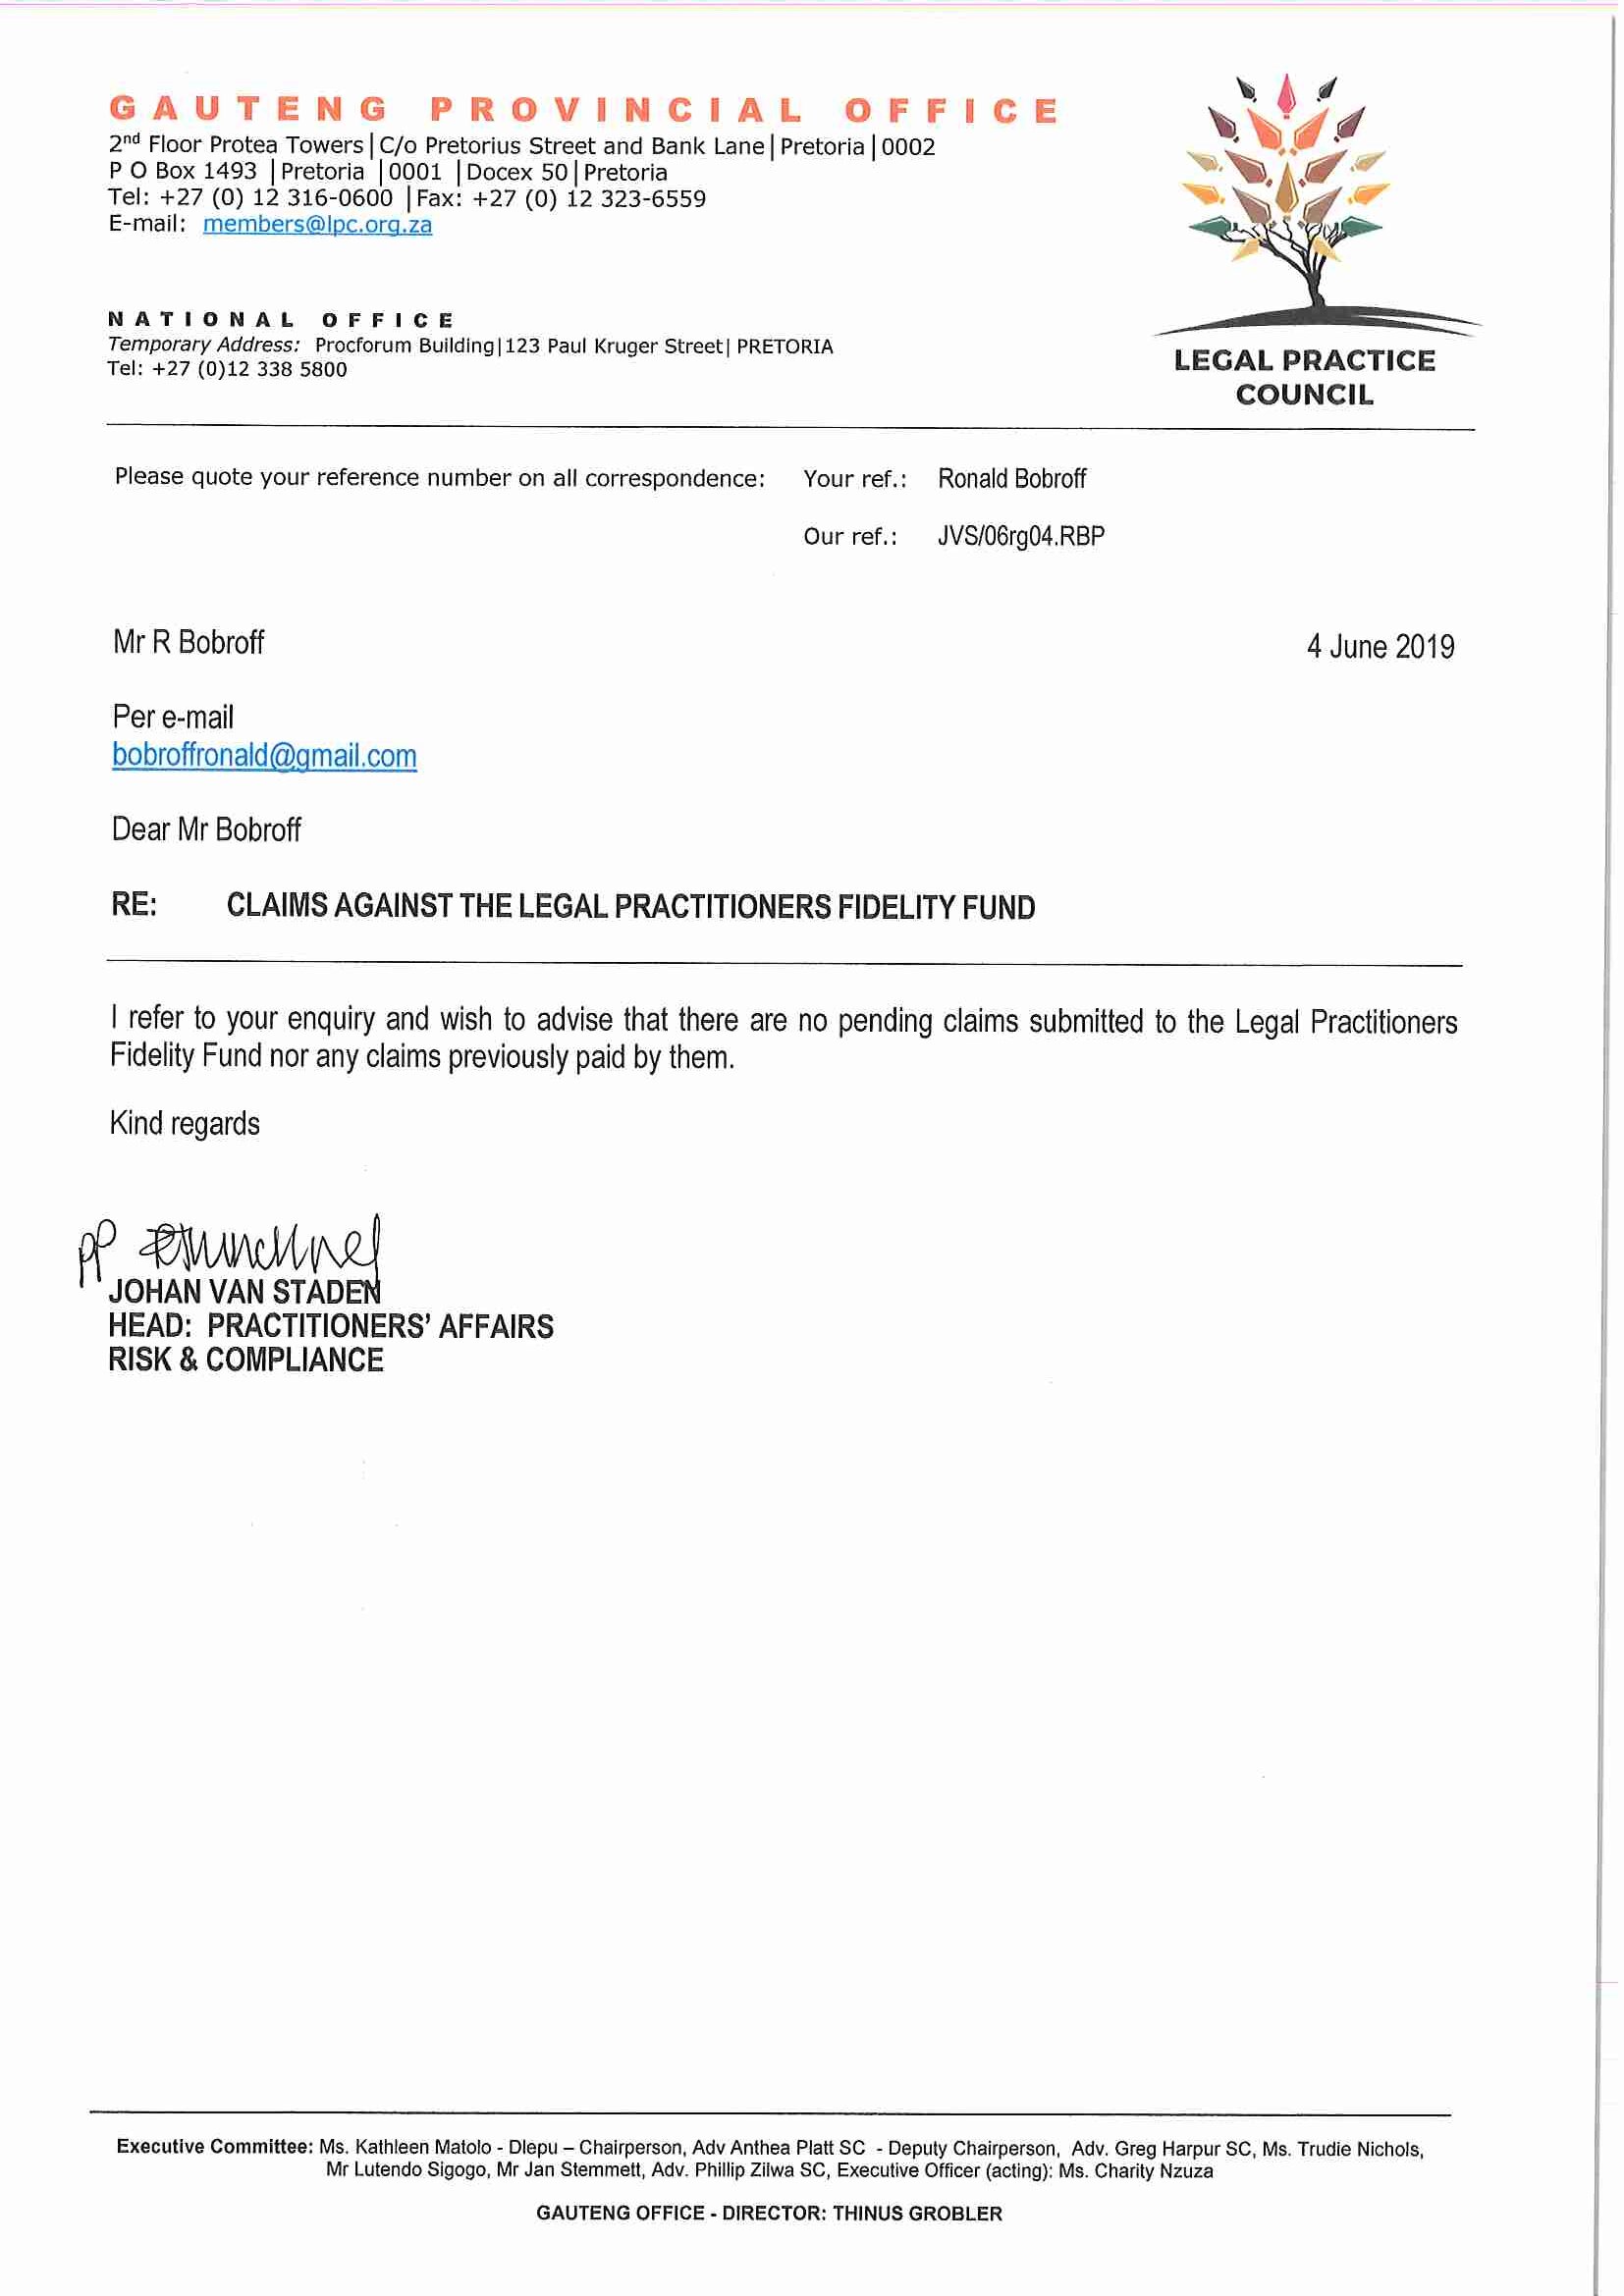 Latest letter from Johan van Staden re no claims dated 4 June 2019 1